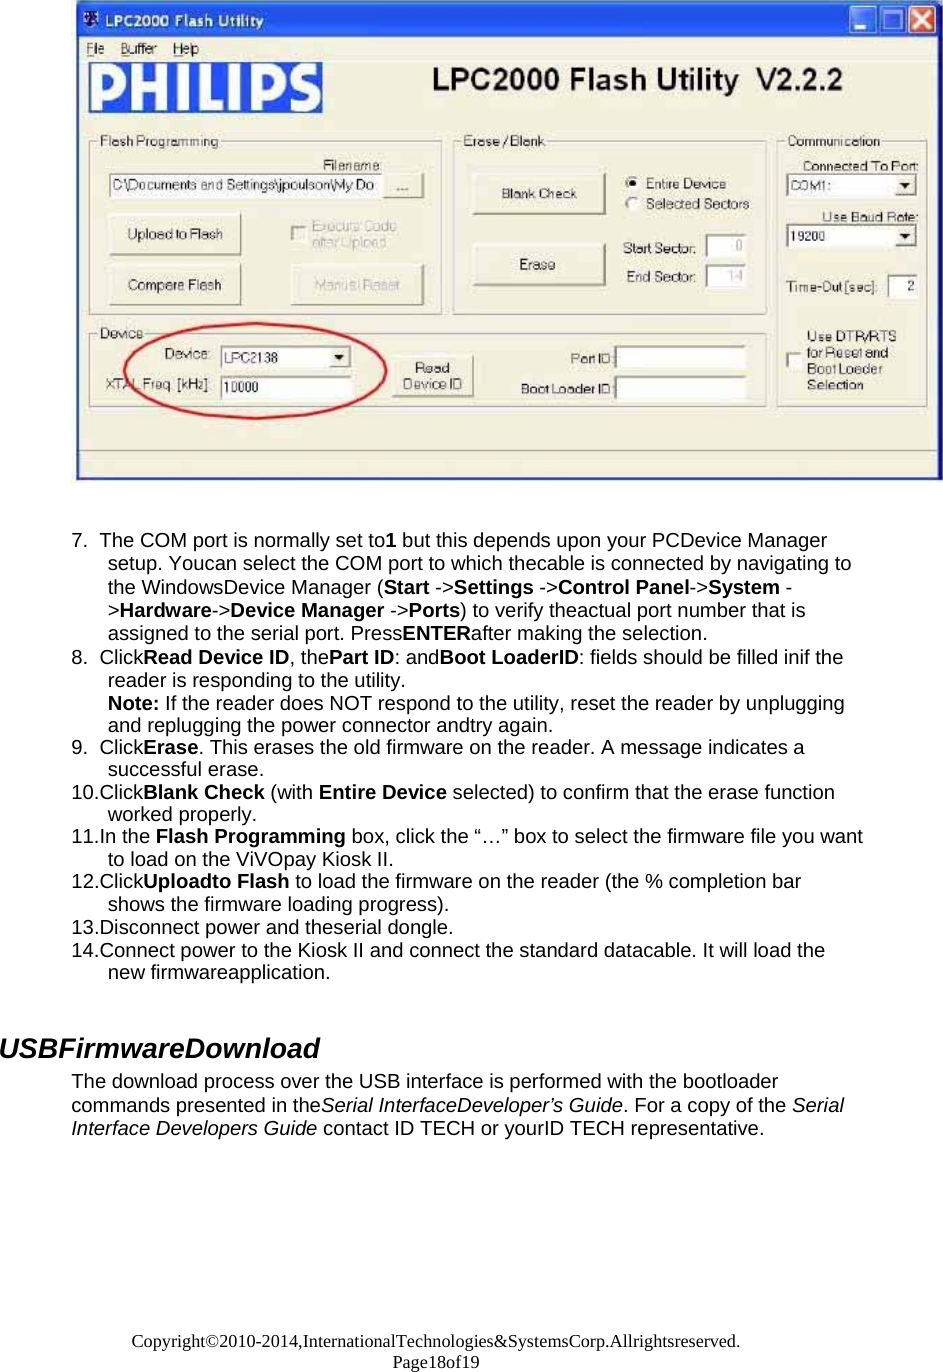 Copyright©2010-2014,InternationalTechnologies&amp;SystemsCorp.Allrightsreserved. Page18of19     7.  The COM port is normally set to1 but this depends upon your PCDevice Manager setup. Youcan select the COM port to which thecable is connected by navigating to the WindowsDevice Manager (Start -&gt;Settings -&gt;Control Panel-&gt;System -&gt;Hardware-&gt;Device Manager -&gt;Ports) to verify theactual port number that is assigned to the serial port. PressENTERafter making the selection. 8.  ClickRead Device ID, thePart ID: andBoot LoaderID: fields should be filled inif the reader is responding to the utility. Note: If the reader does NOT respond to the utility, reset the reader by unplugging and replugging the power connector andtry again. 9.  ClickErase. This erases the old firmware on the reader. A message indicates a successful erase. 10.ClickBlank Check (with Entire Device selected) to confirm that the erase function worked properly. 11.In the Flash Programming box, click the “…” box to select the firmware file you want to load on the ViVOpay Kiosk II. 12.ClickUploadto Flash to load the firmware on the reader (the % completion bar shows the firmware loading progress). 13.Disconnect power and theserial dongle. 14.Connect power to the Kiosk II and connect the standard datacable. It will load the new firmwareapplication.   USBFirmwareDownload The download process over the USB interface is performed with the bootloader commands presented in theSerial InterfaceDeveloper’s Guide. For a copy of the Serial Interface Developers Guide contact ID TECH or yourID TECH representative.   